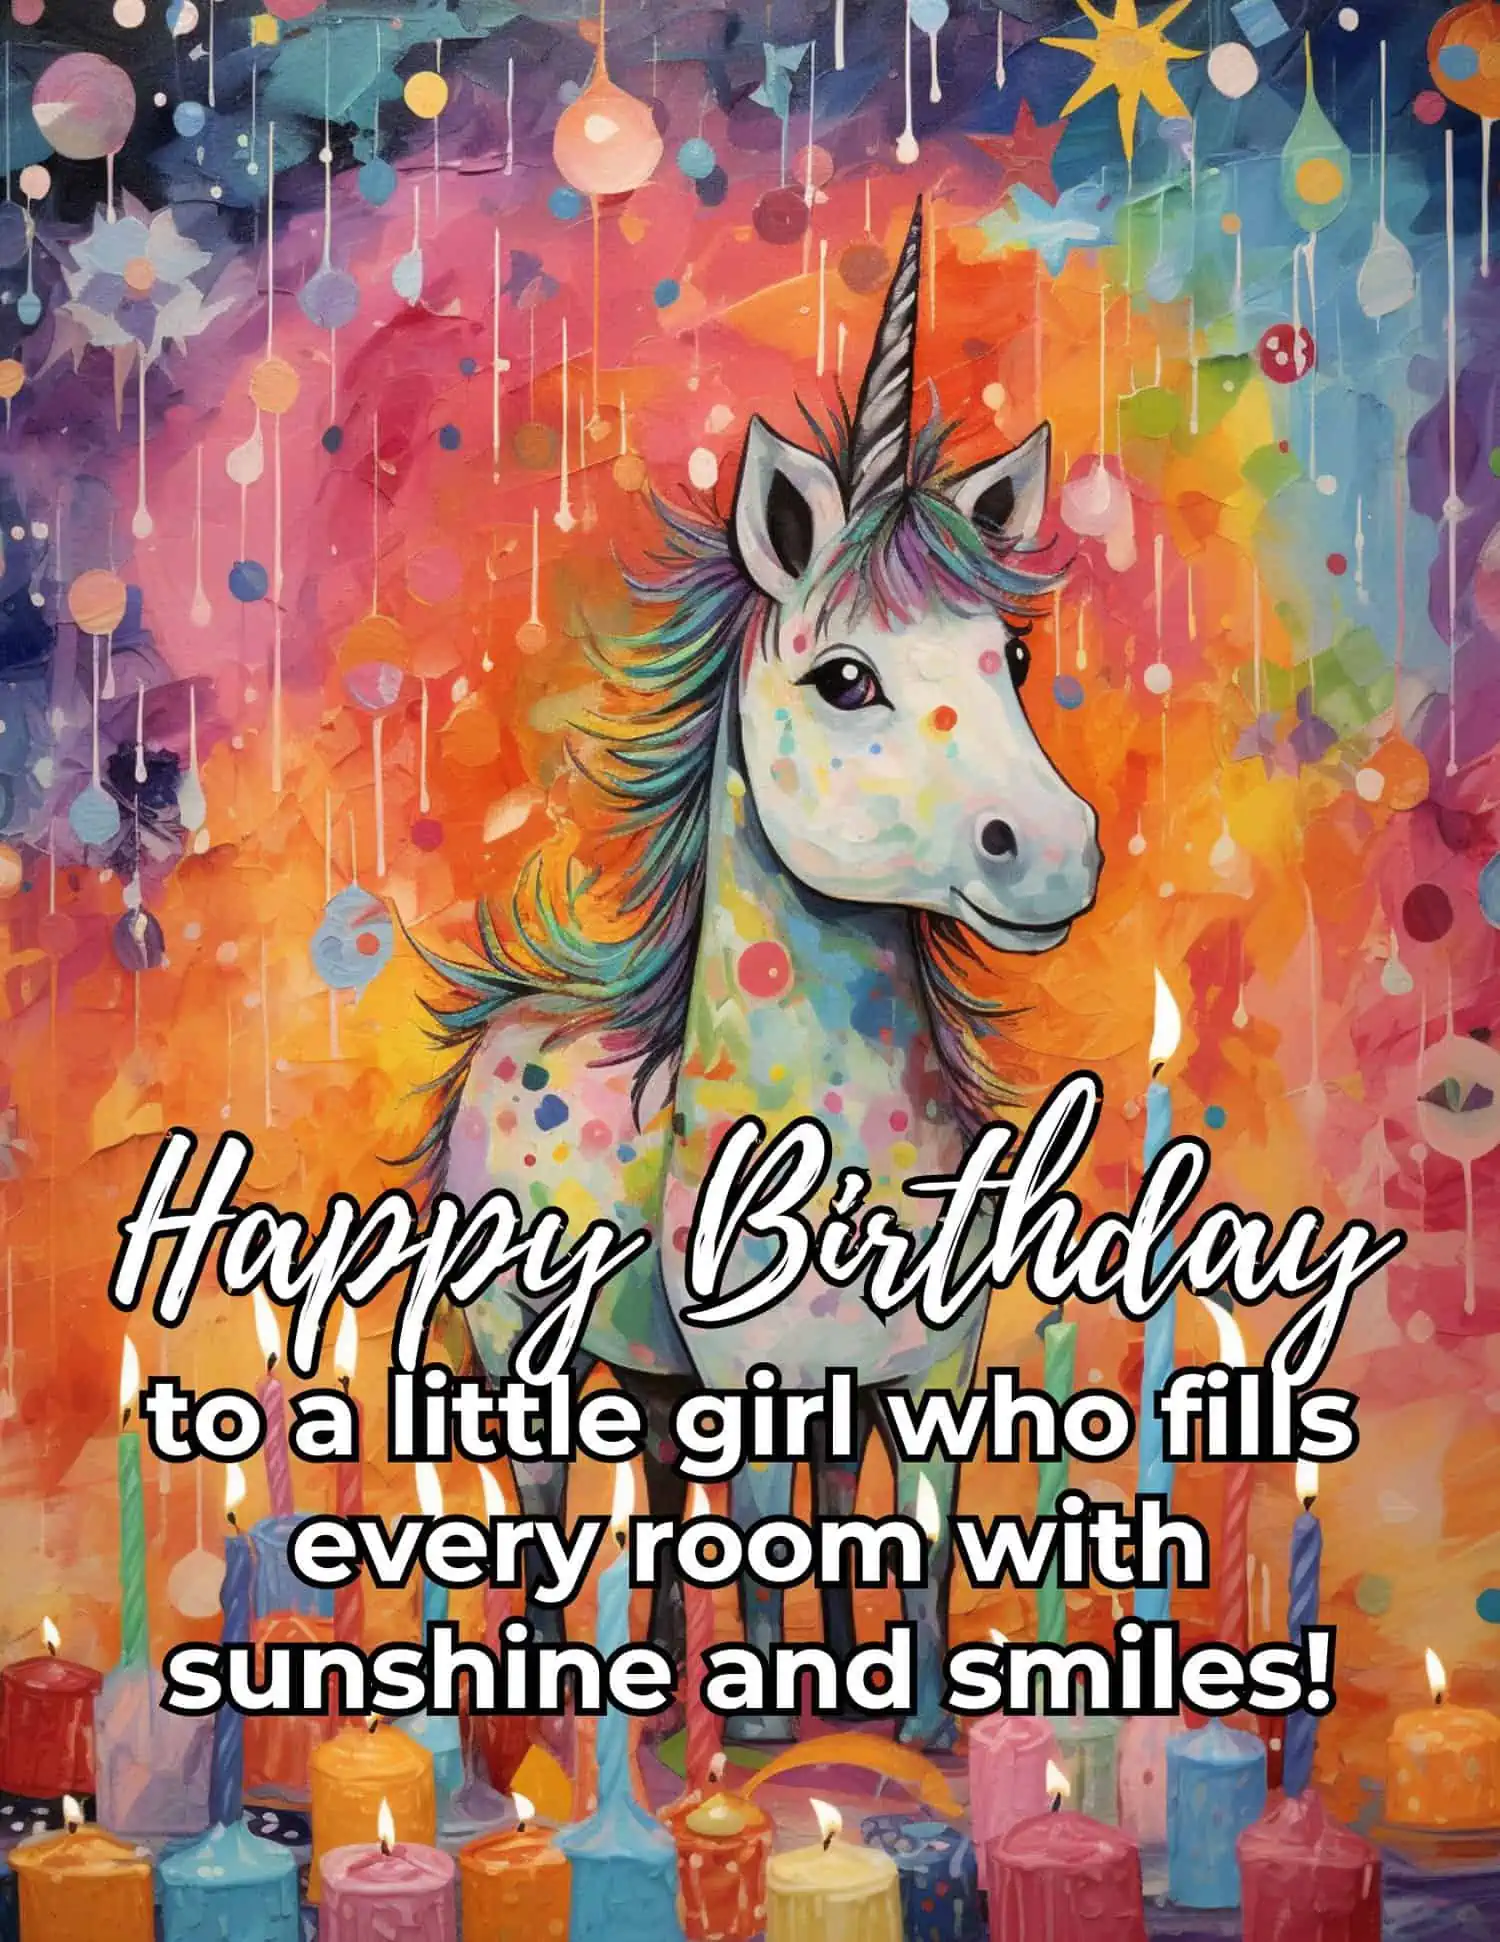 A collection of heartwarming and joyful birthday wishes tailored for a little girl's third birthday, reflecting the wonder and magic of this special age.